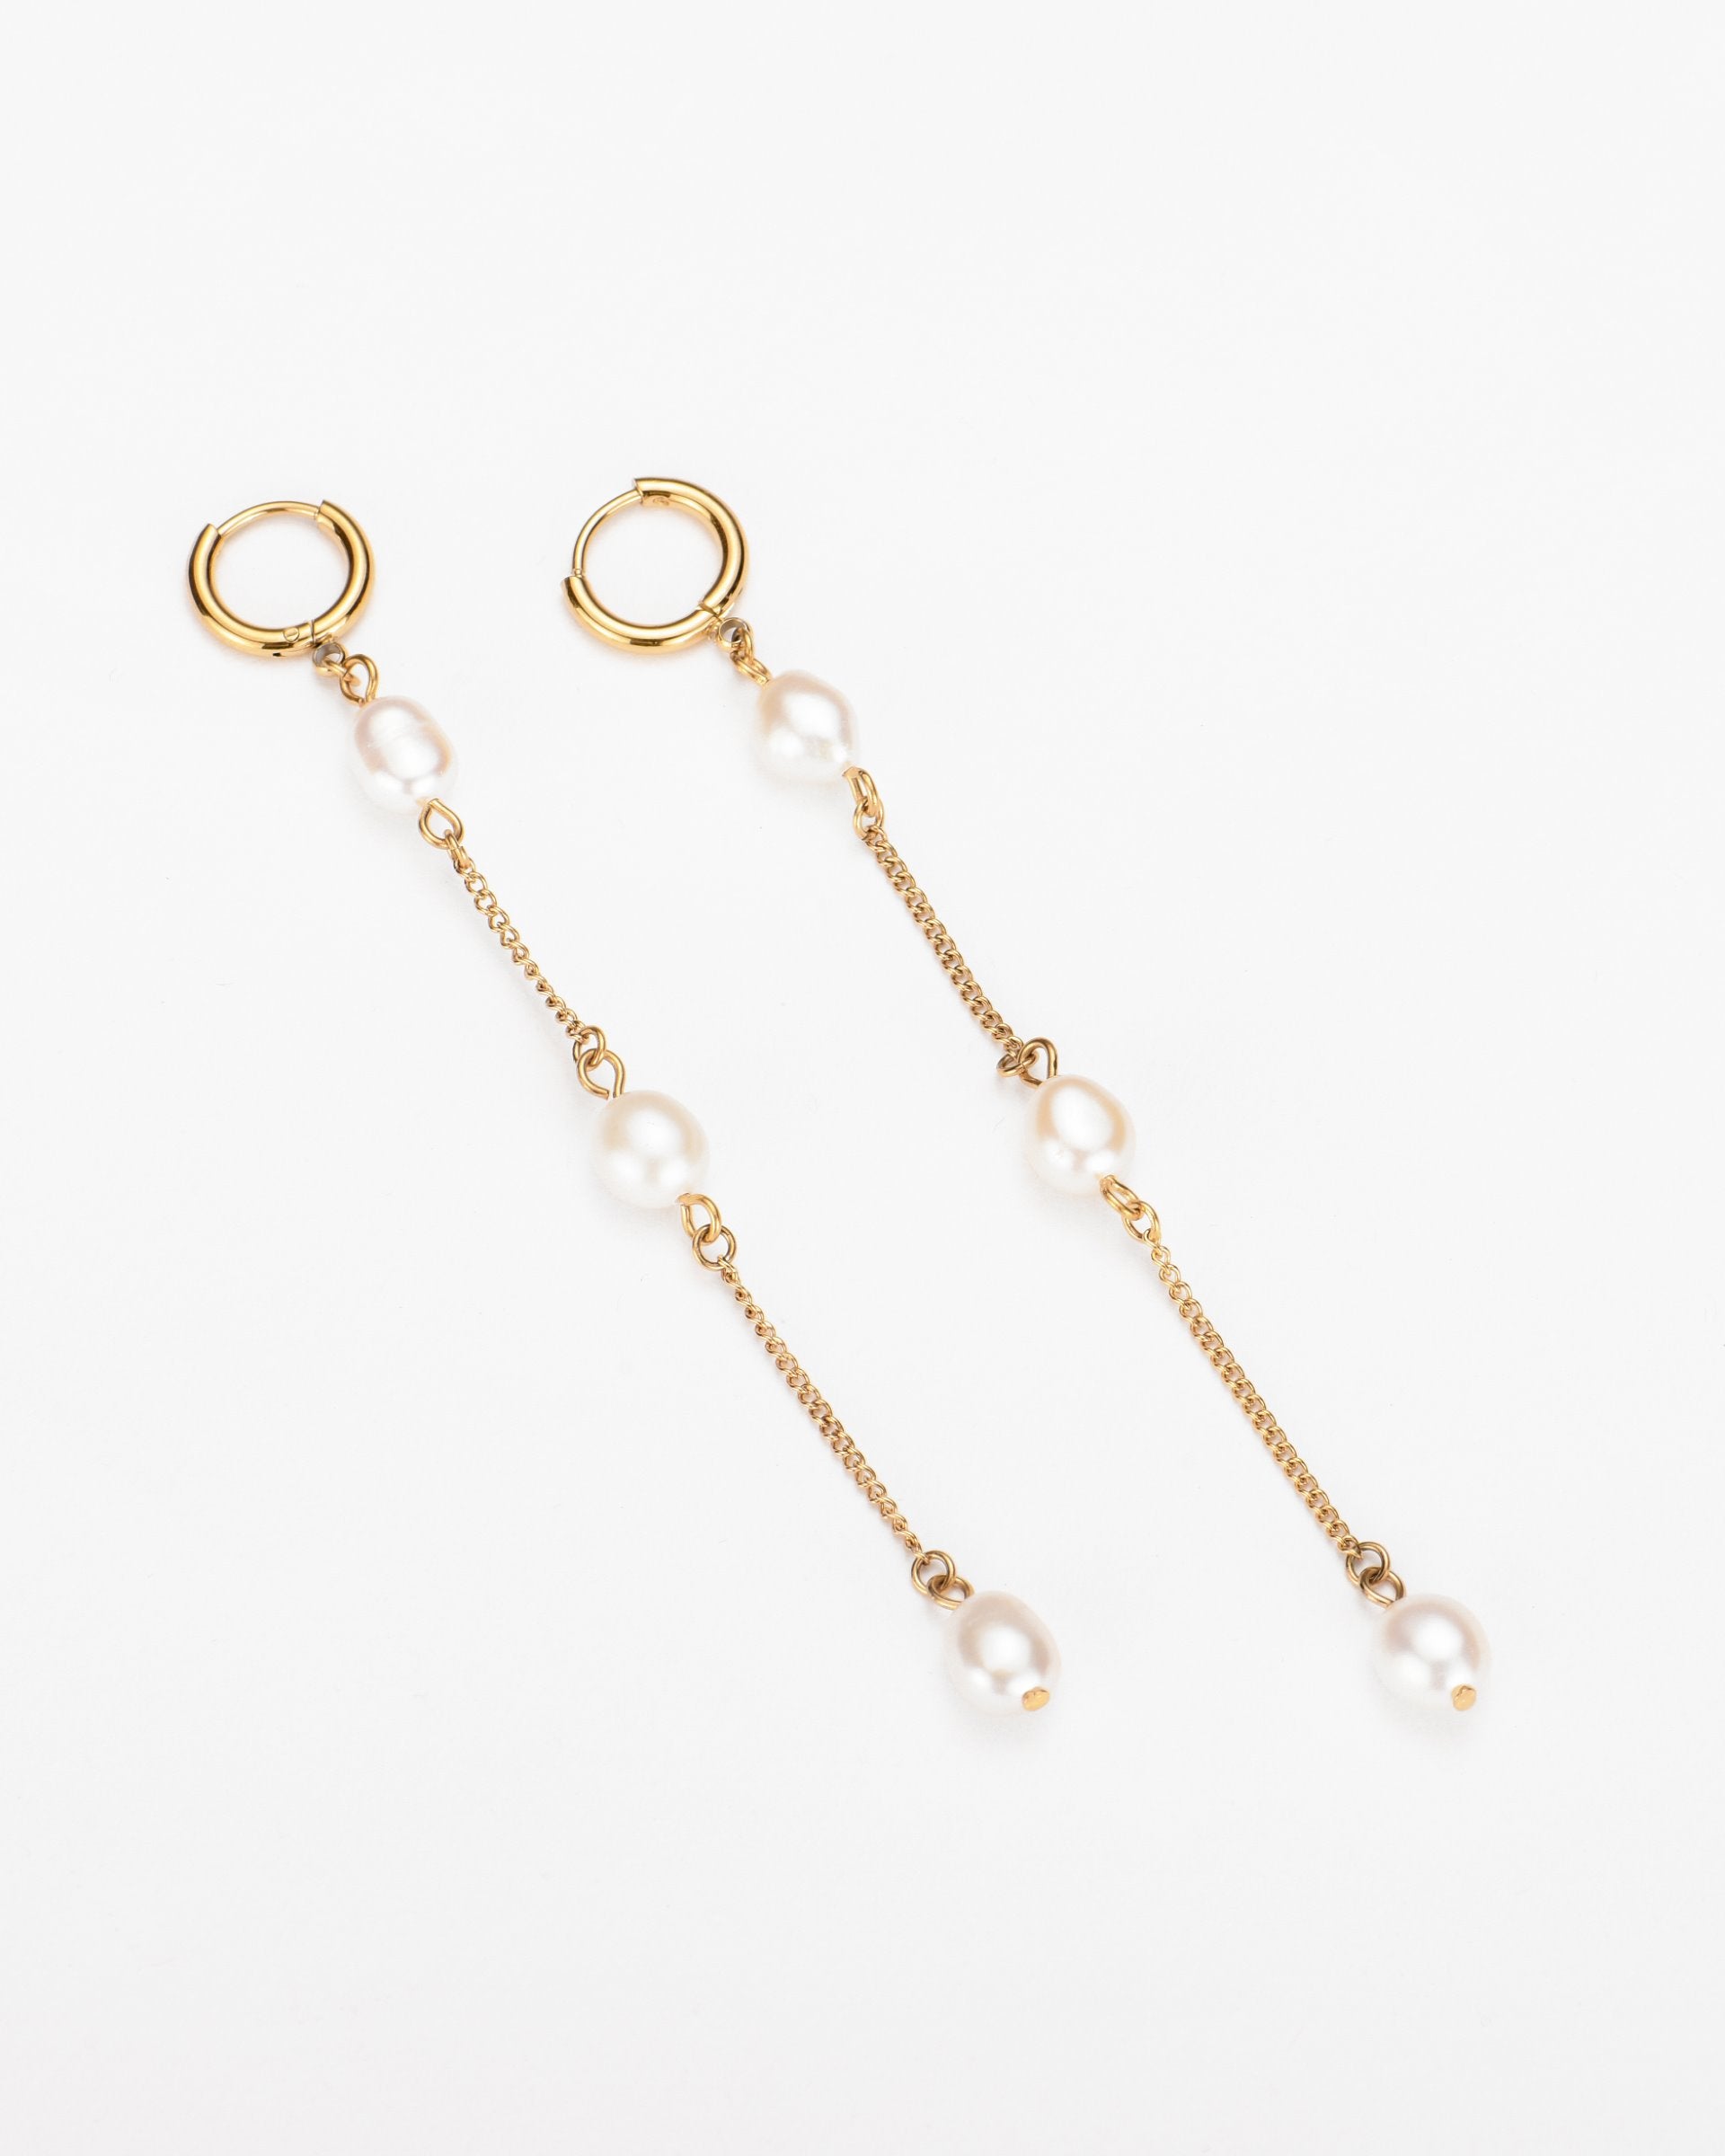 A pair of elegant Yoyo earrings by For Art&#39;s Sake® featuring gold hoops with 18k gold plating, attached to delicate chains adorned with three evenly spaced freshwater pearls. The earrings are laid side by side against a plain white background.